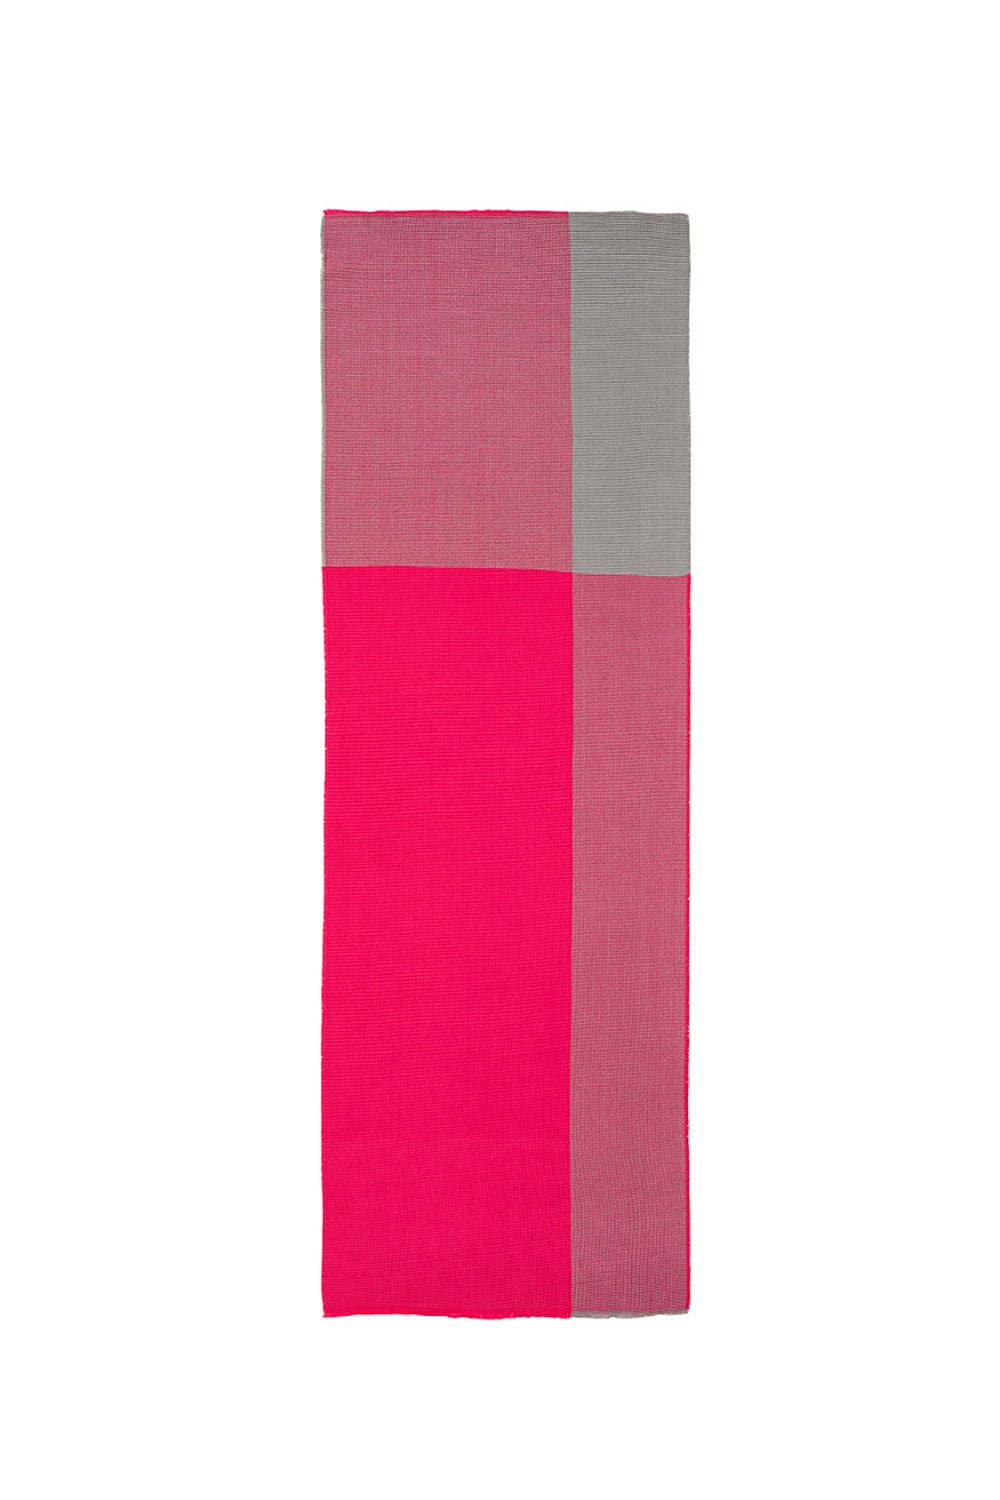 Thin scarf with mixed knits in shades of pink